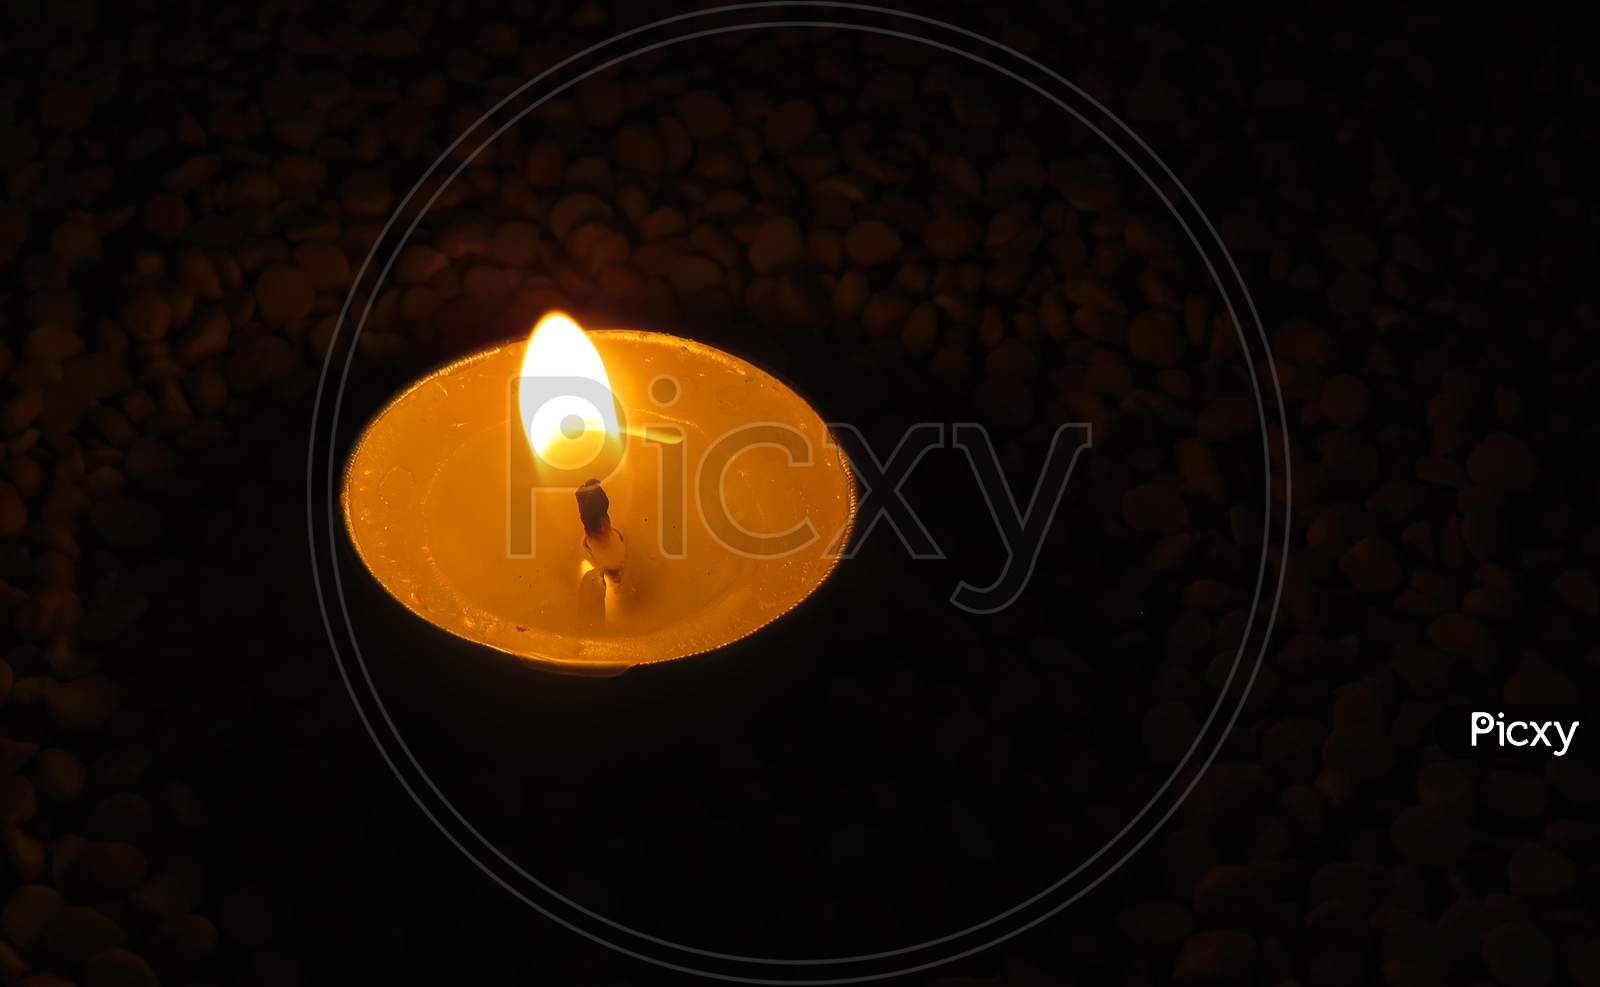 Candles on Split pea background,Isolated candles on the seeds,Burning Candles.